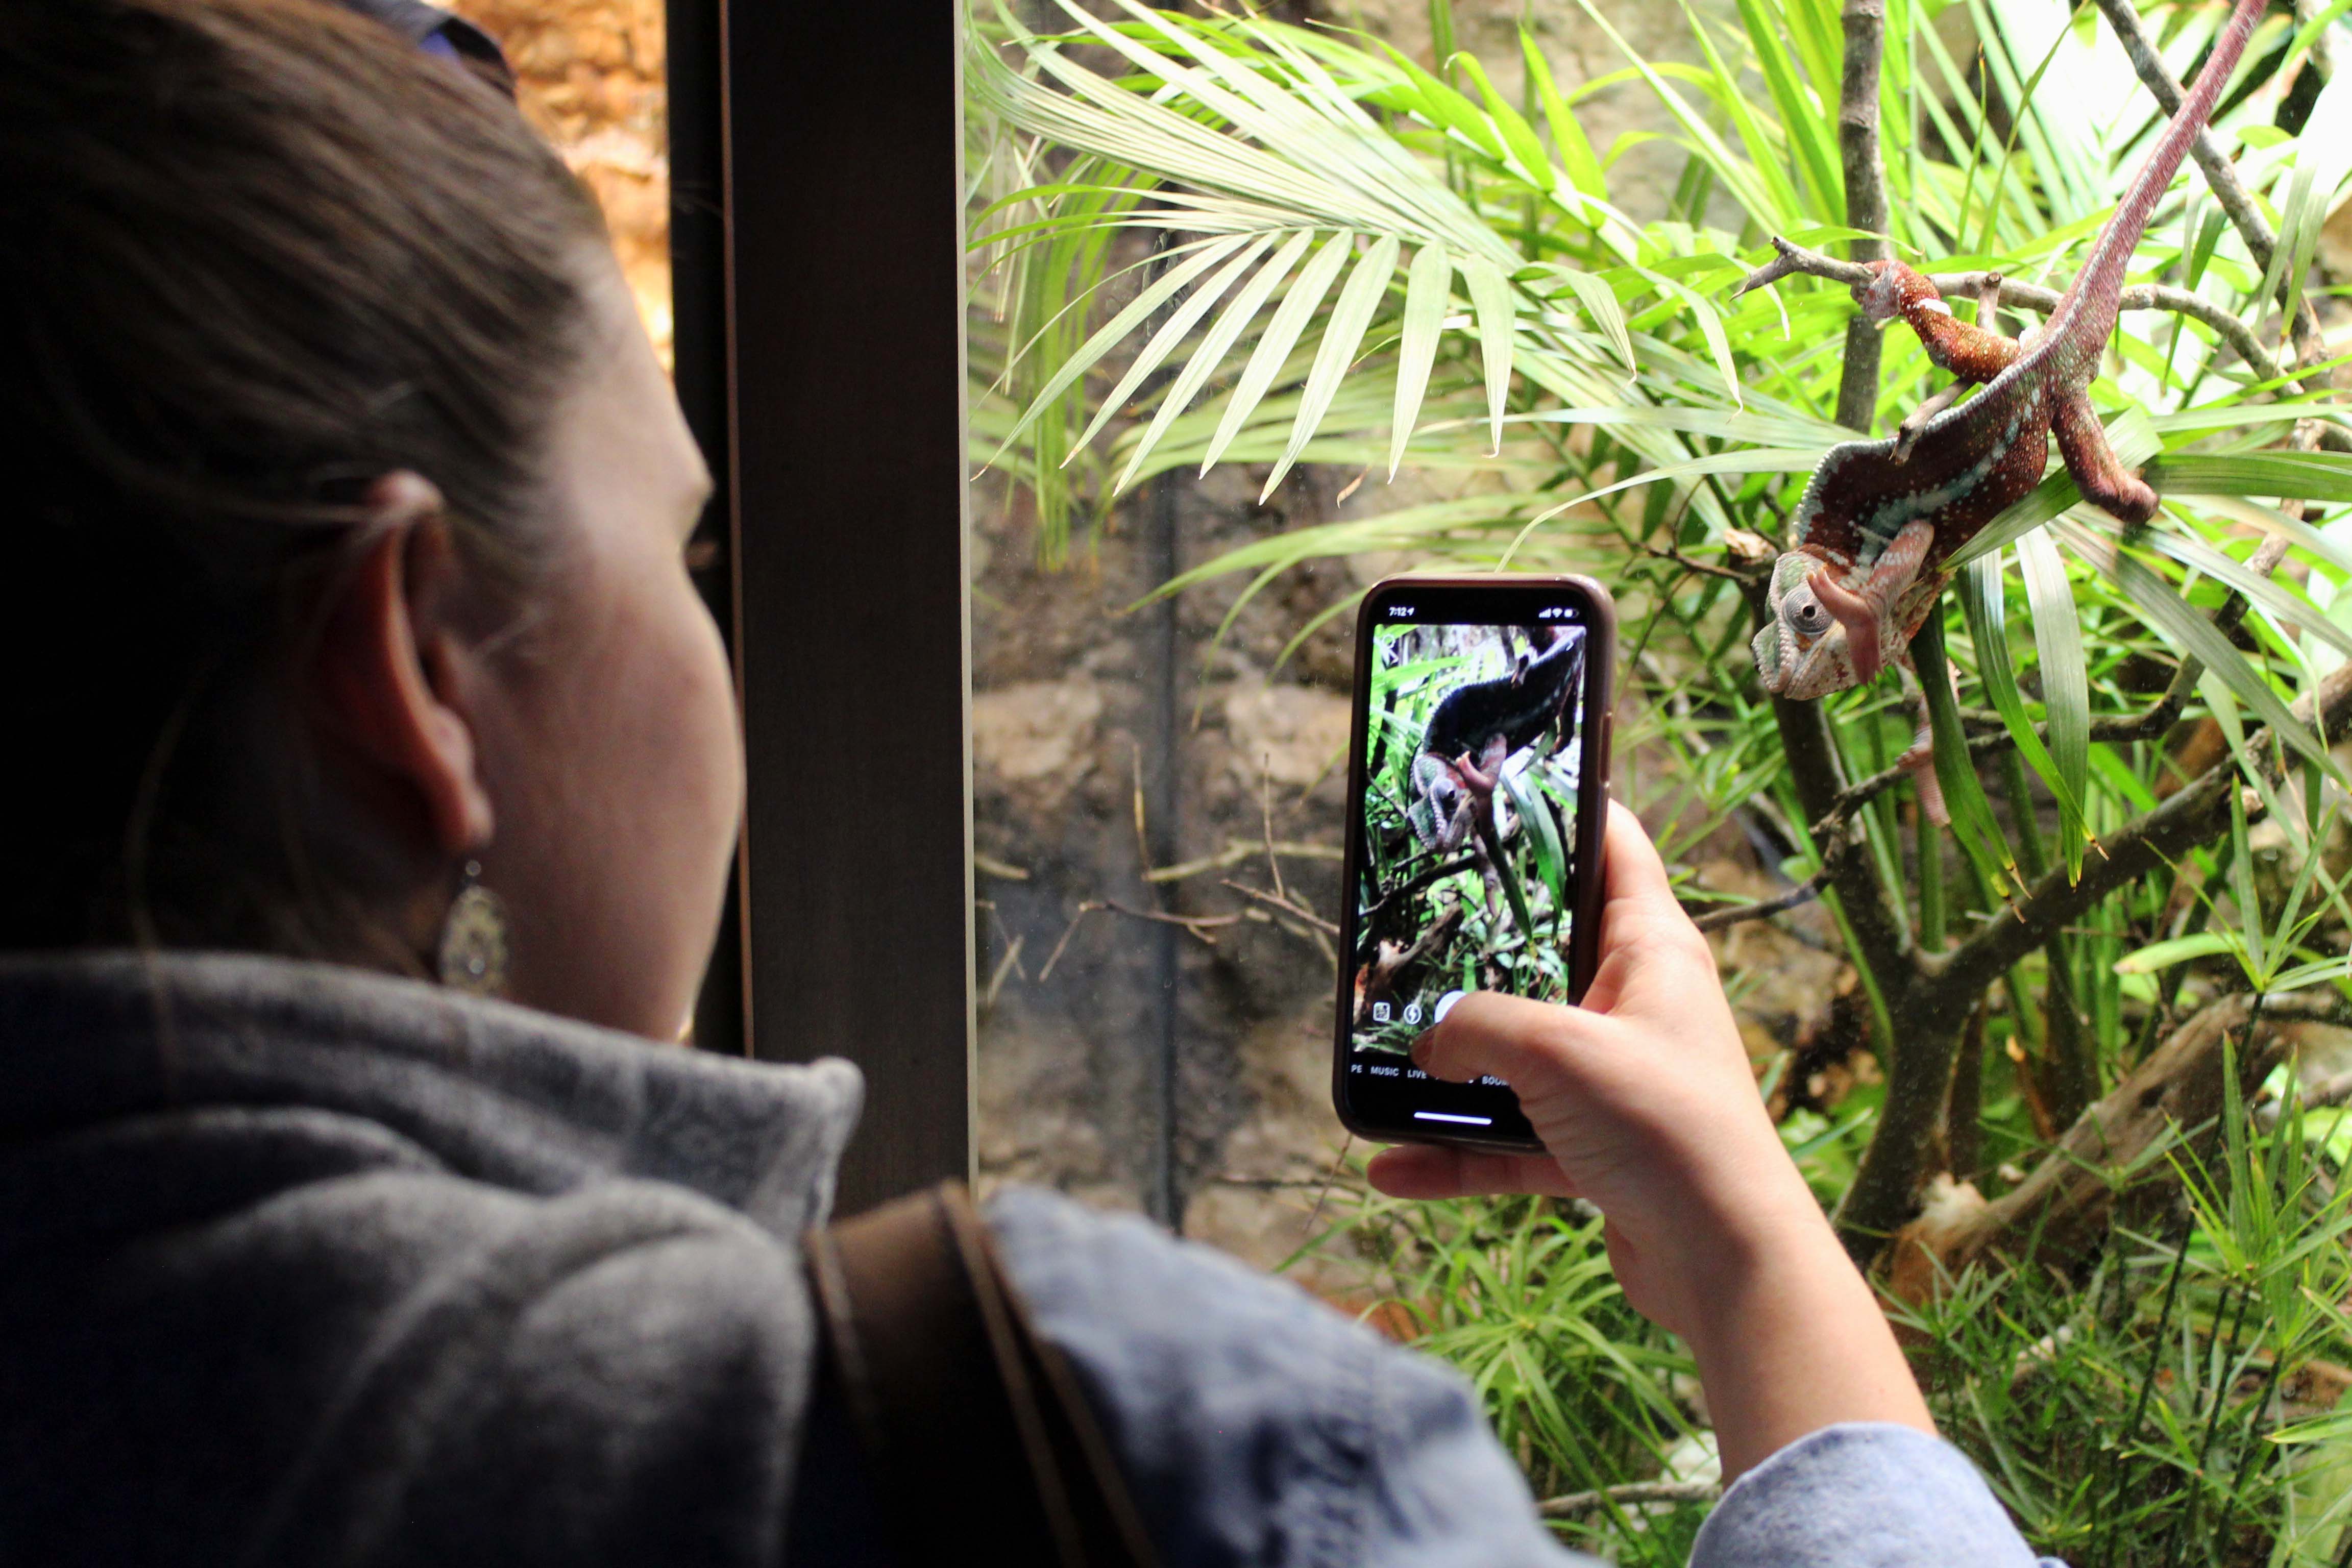 Terrestrial creatures, like the Panther Chameleon, are popular with Aquarium guests.